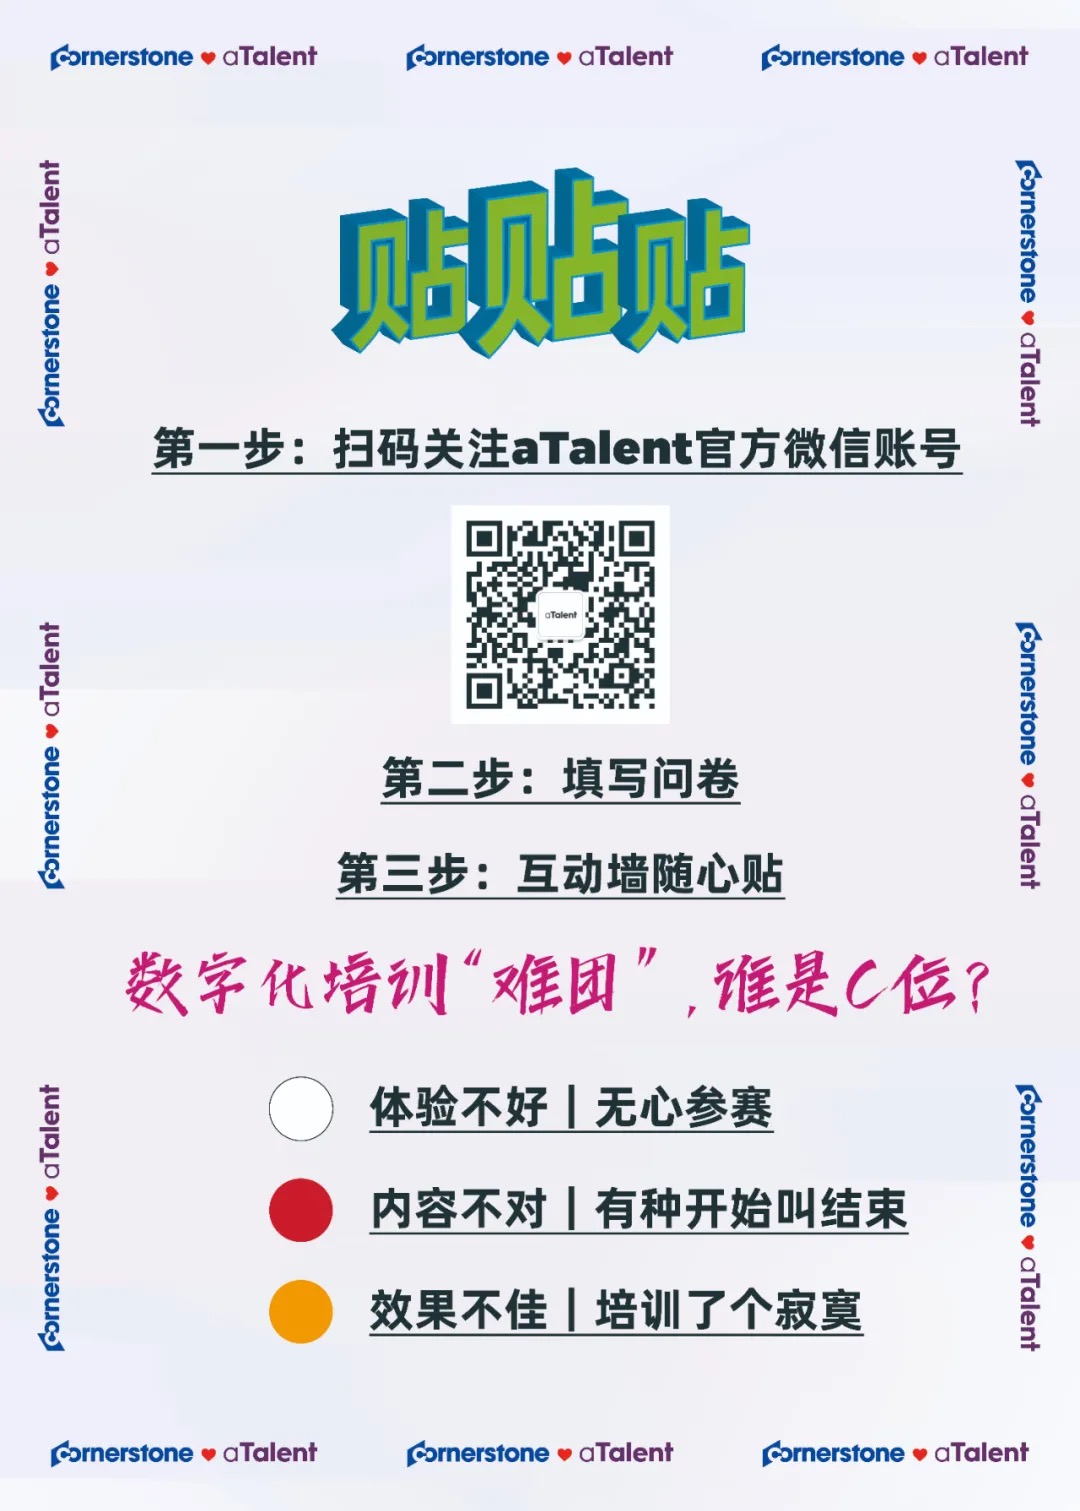 aTalent & Cornerstone OnDemand Participated in China Enterprise Training & Development Conference插图4